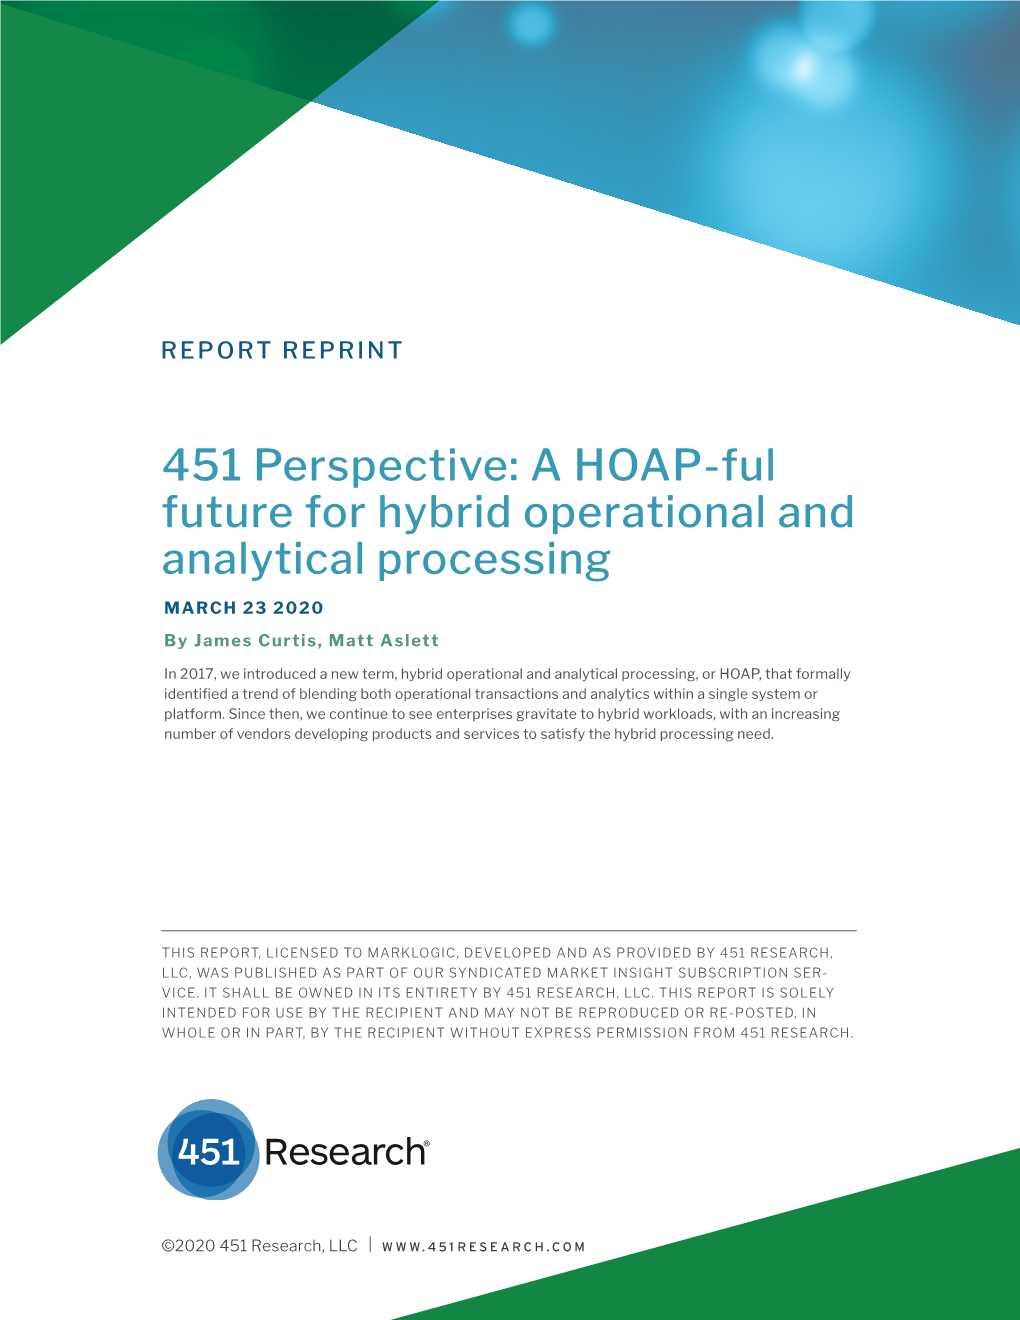 451 Perspective: a HOAP-Ful Future for Hybrid Operational and Analytical Processing